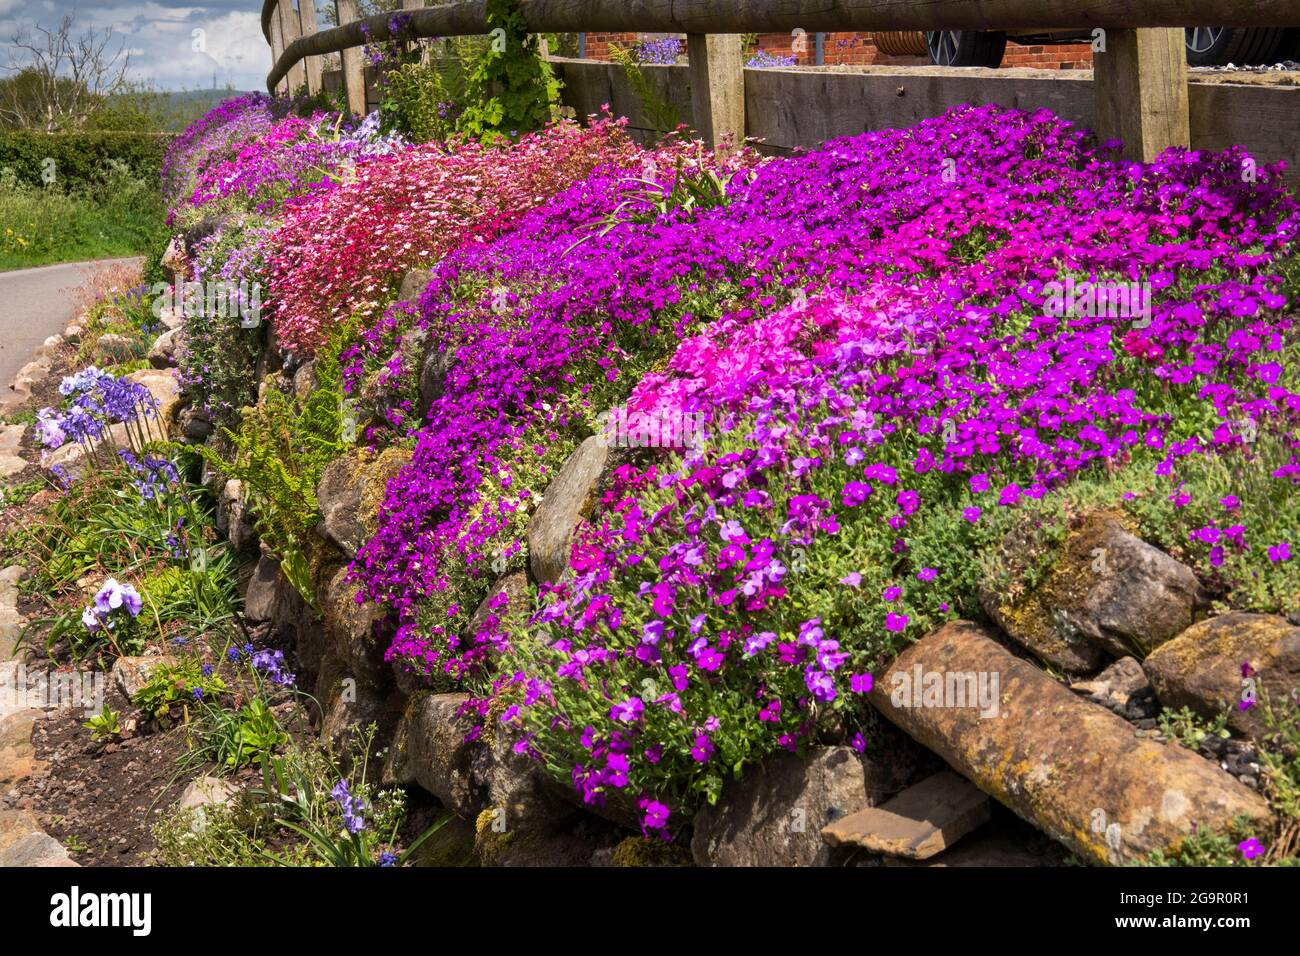 UK, England, Cheshire, Congleton, Puddle Bank Lane, colourful pink, purple and red early summer aubretia flowers in garden boundary wall Stock Photo